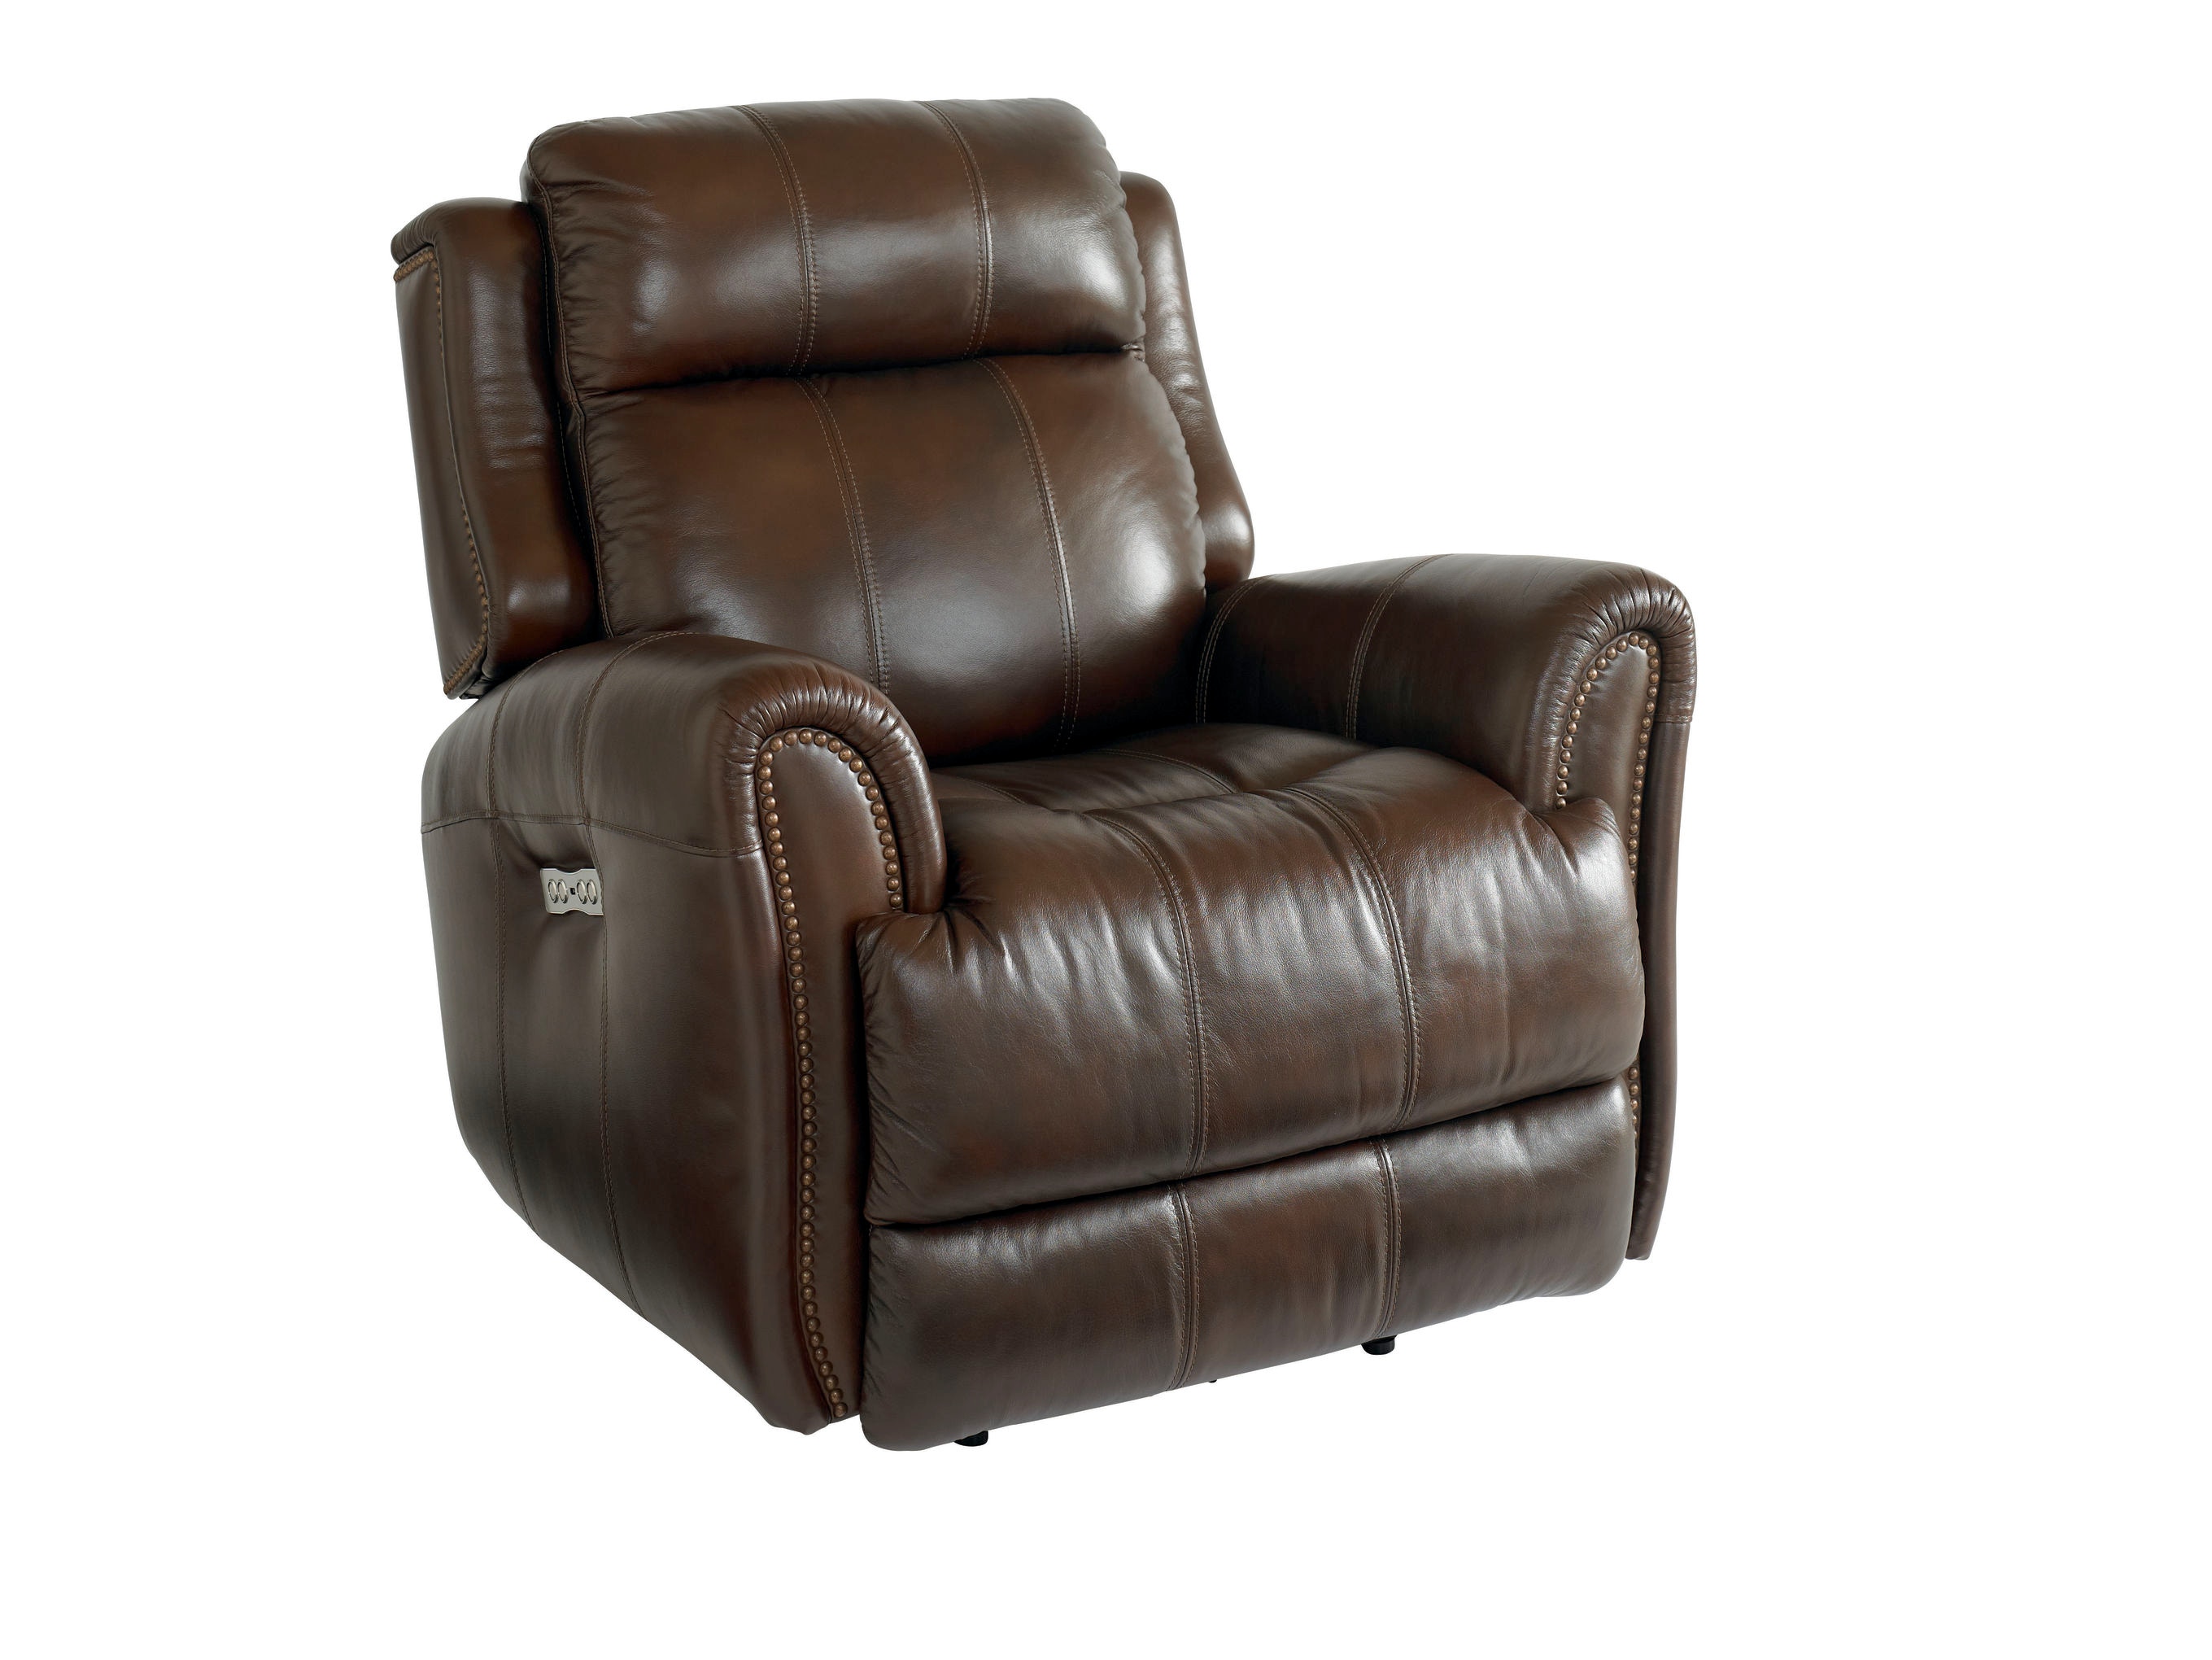 compare prices on harrison wallsaver leather recliners